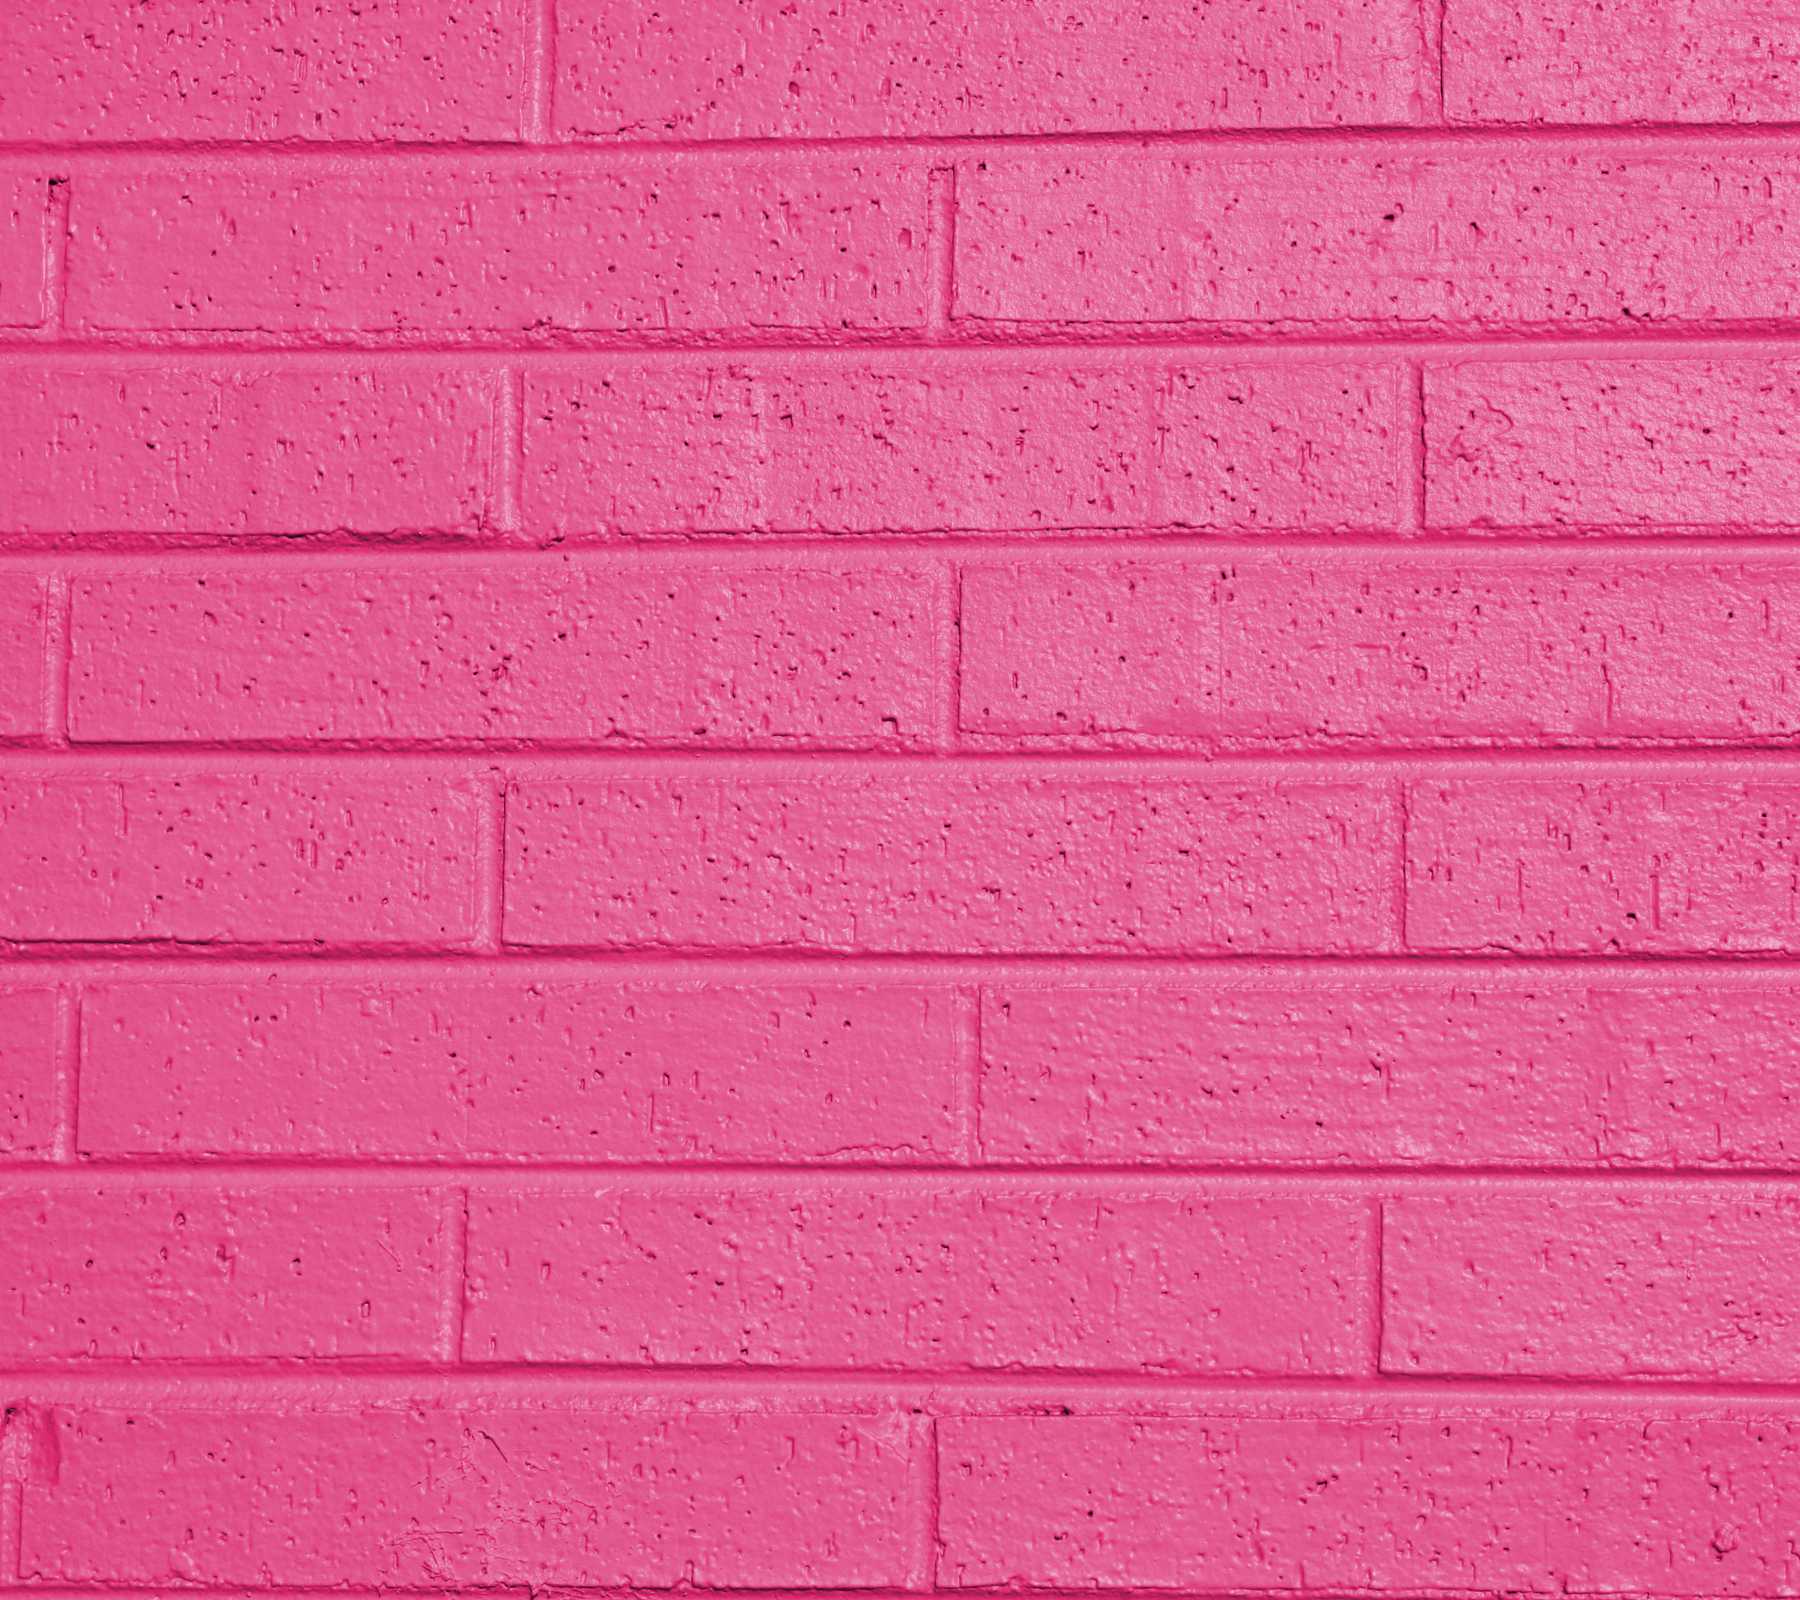 Full HD Pink Wallpapers - Top Free Full HD Pink Backgrounds -  WallpaperAccess